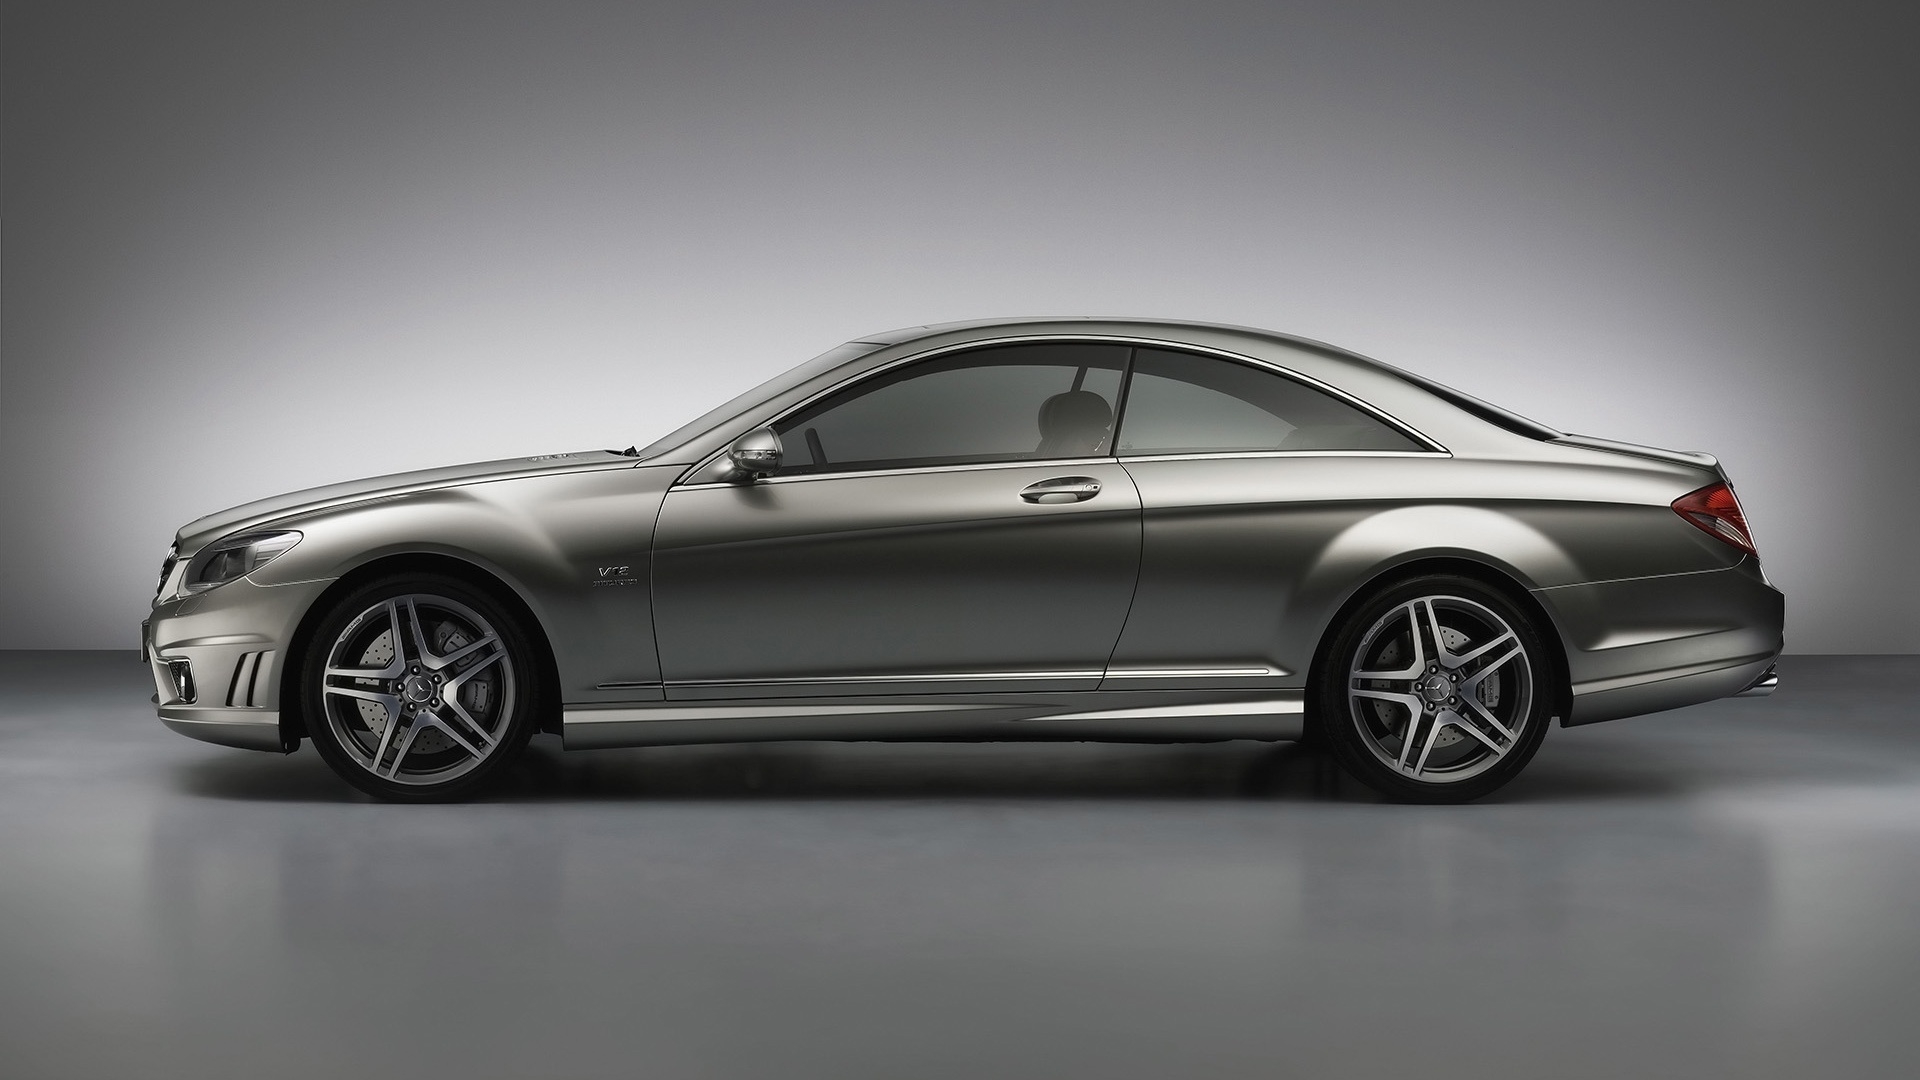 Mercedes Benz CL65 AMG 2008 for 1920 x 1080 HDTV 1080p resolution